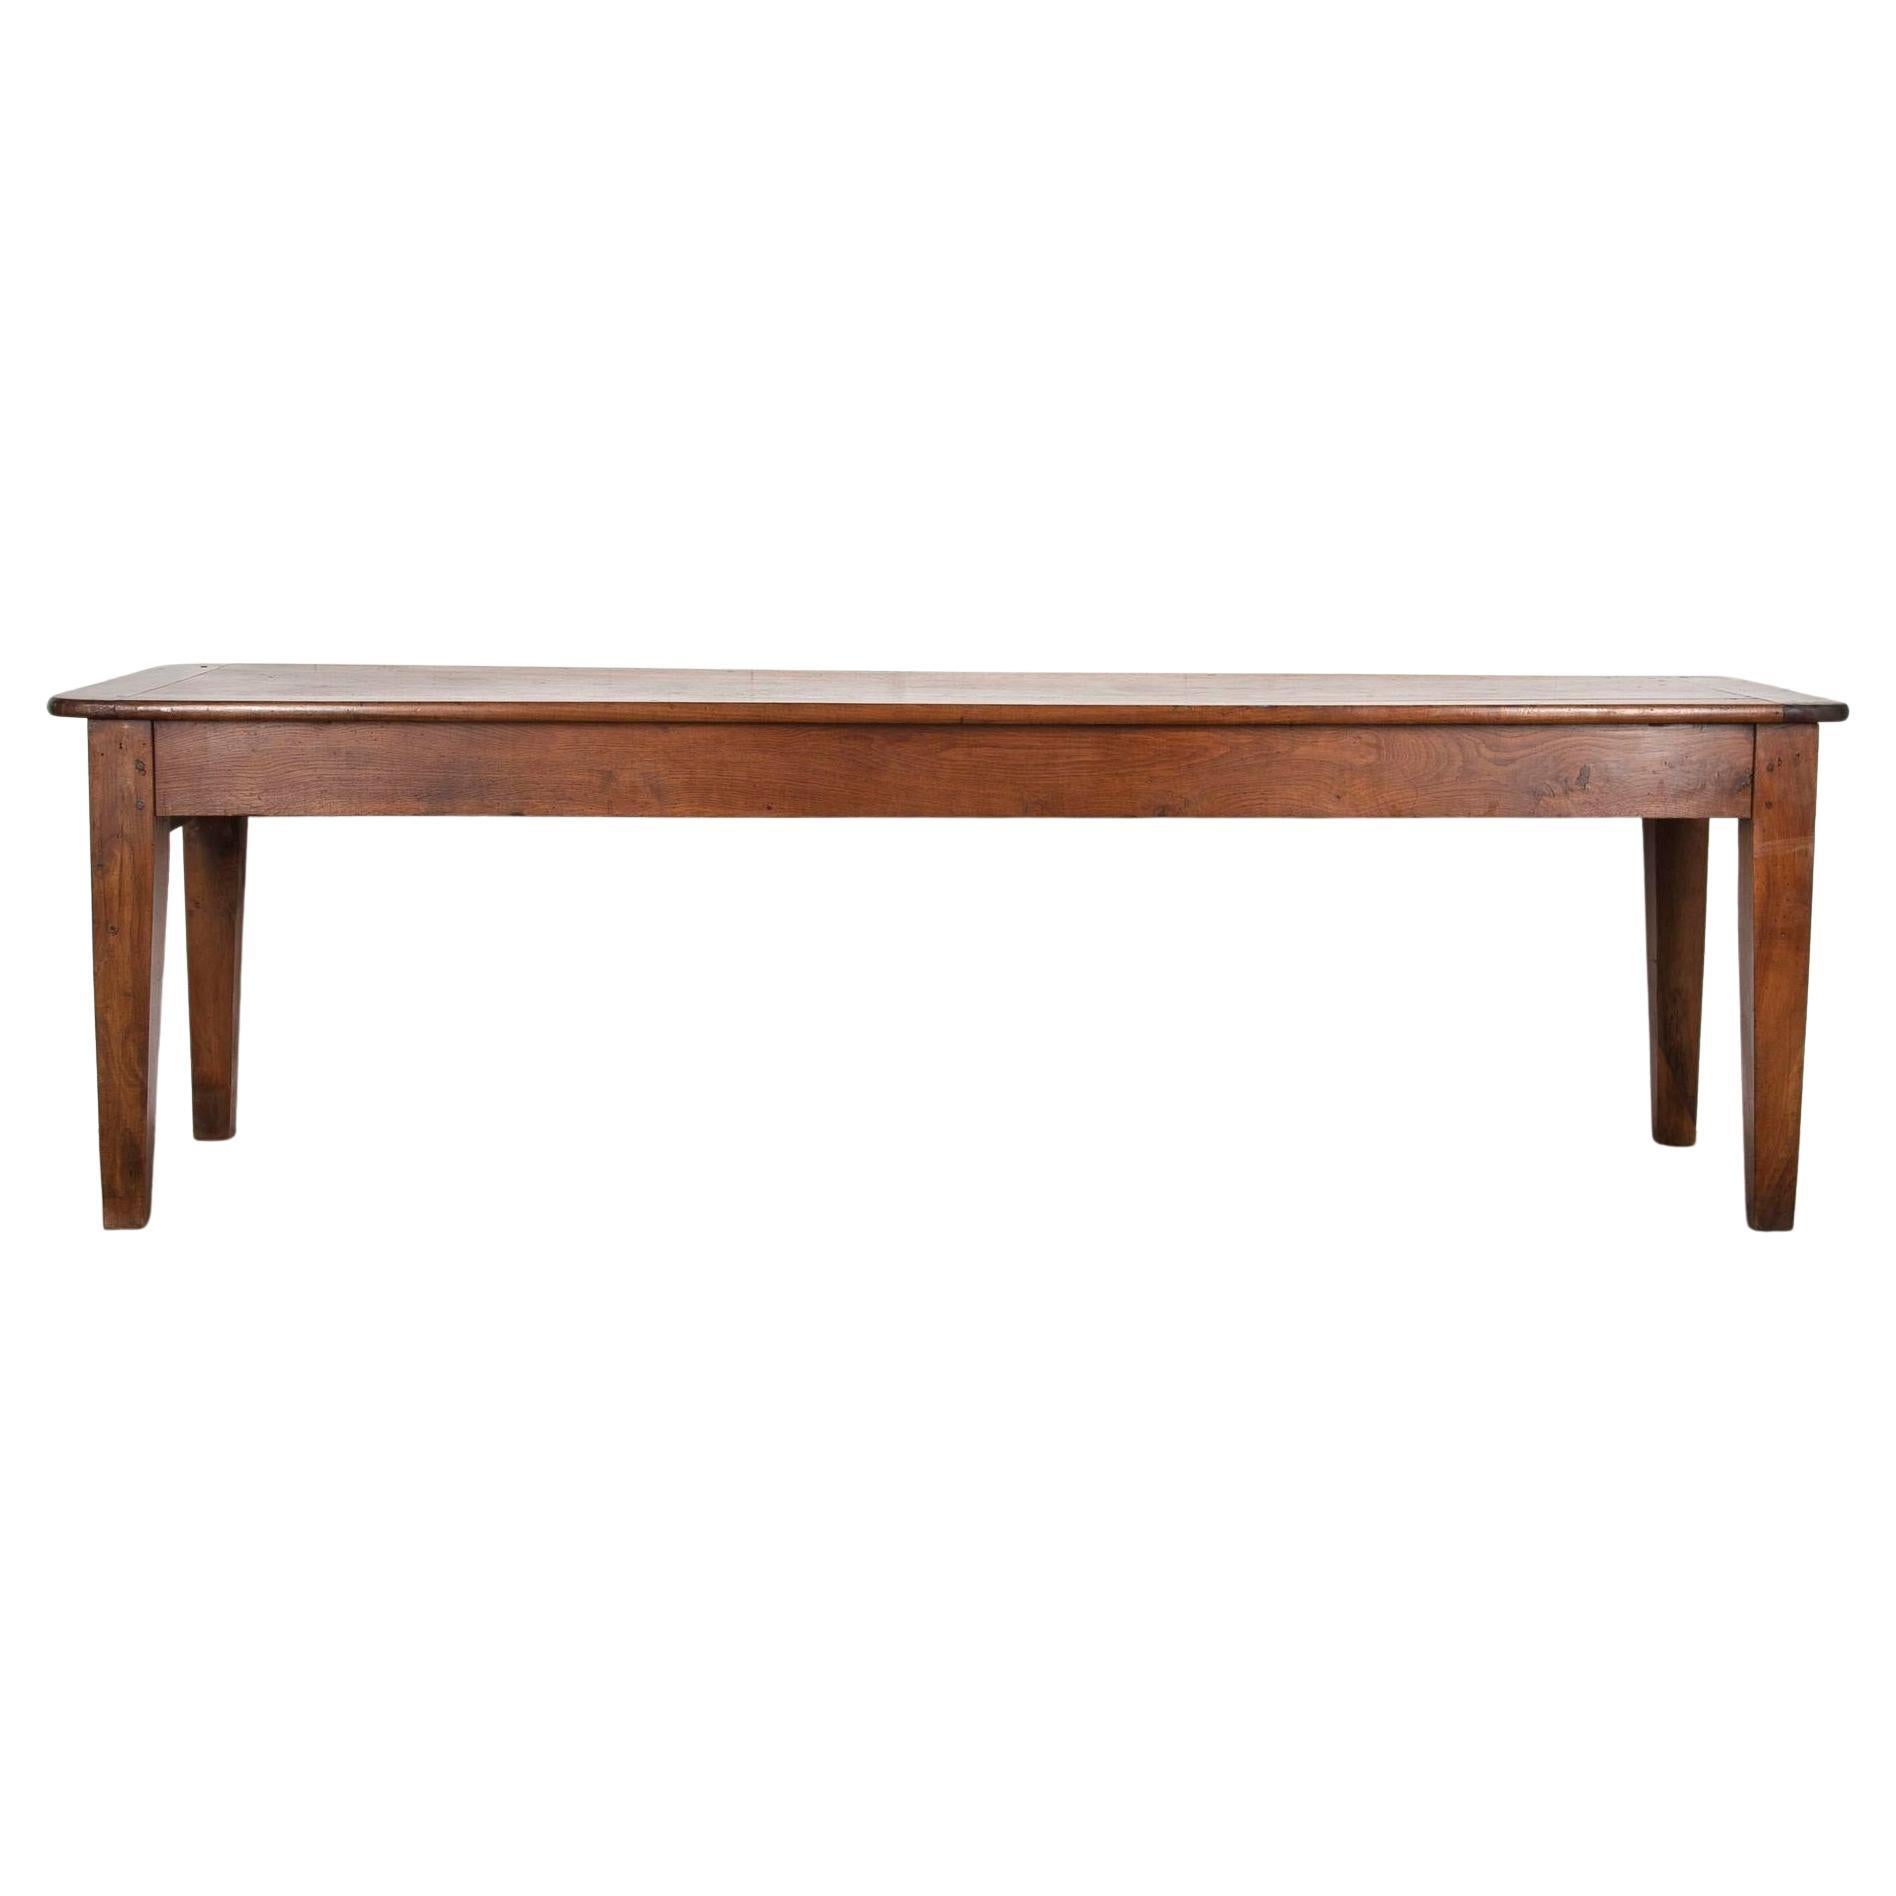 19th Century French Fruitwood Refectory Table For Sale